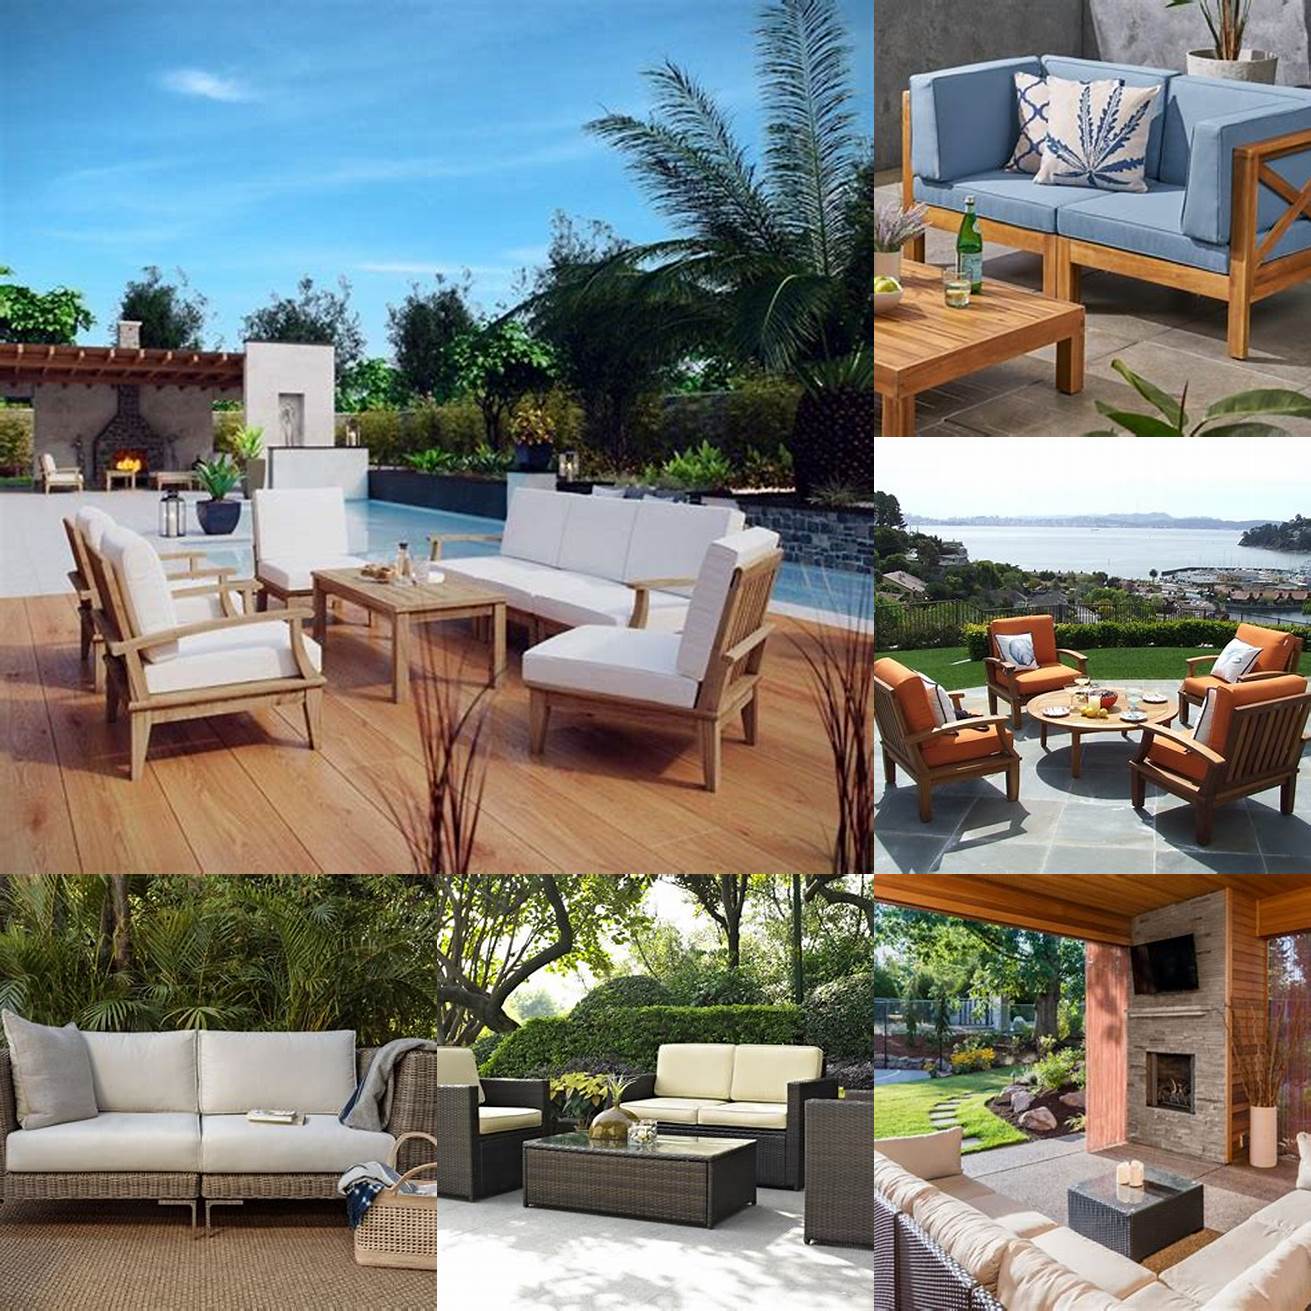 A photo of the furniture being used in the customers outdoor space